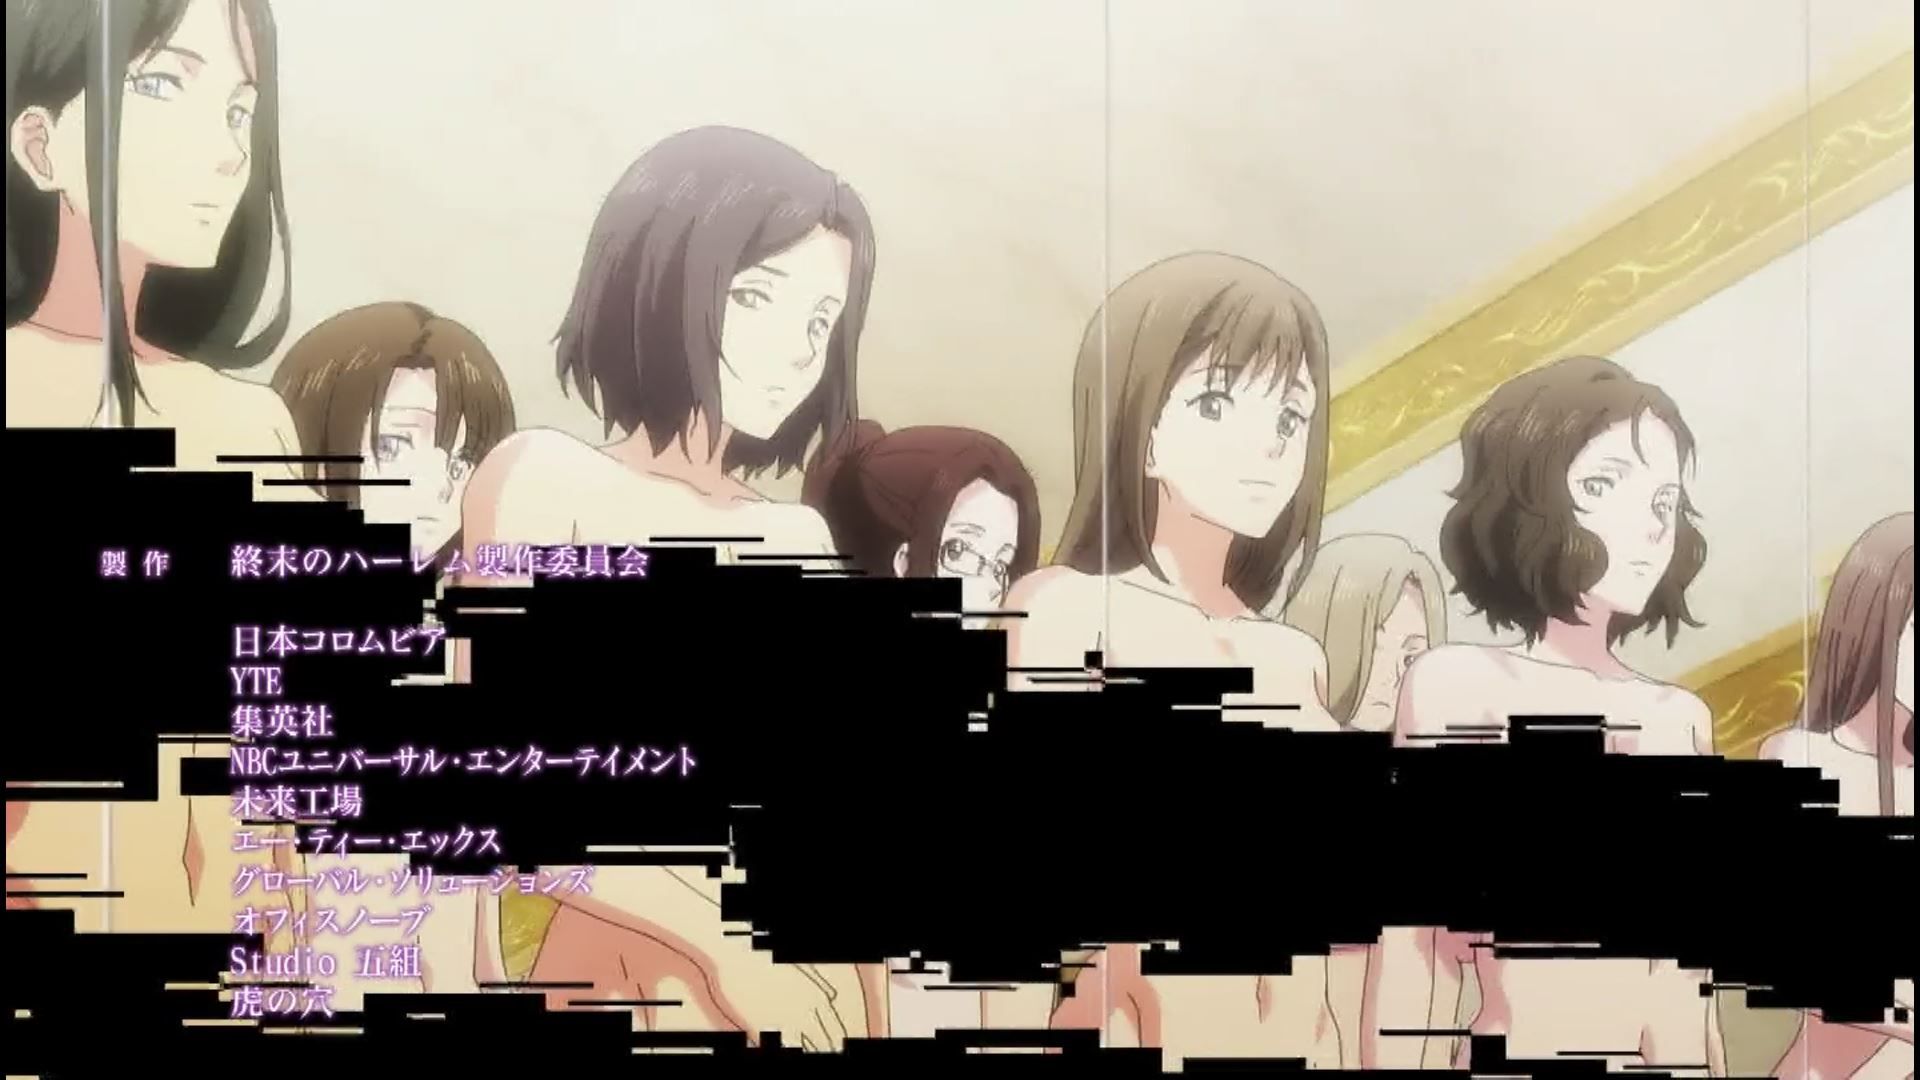 In the anime "Doomsday Harlem" episode 1, there is a scene where a girl and a girl are on the verge of being naked in a world of only men and nakedness 2